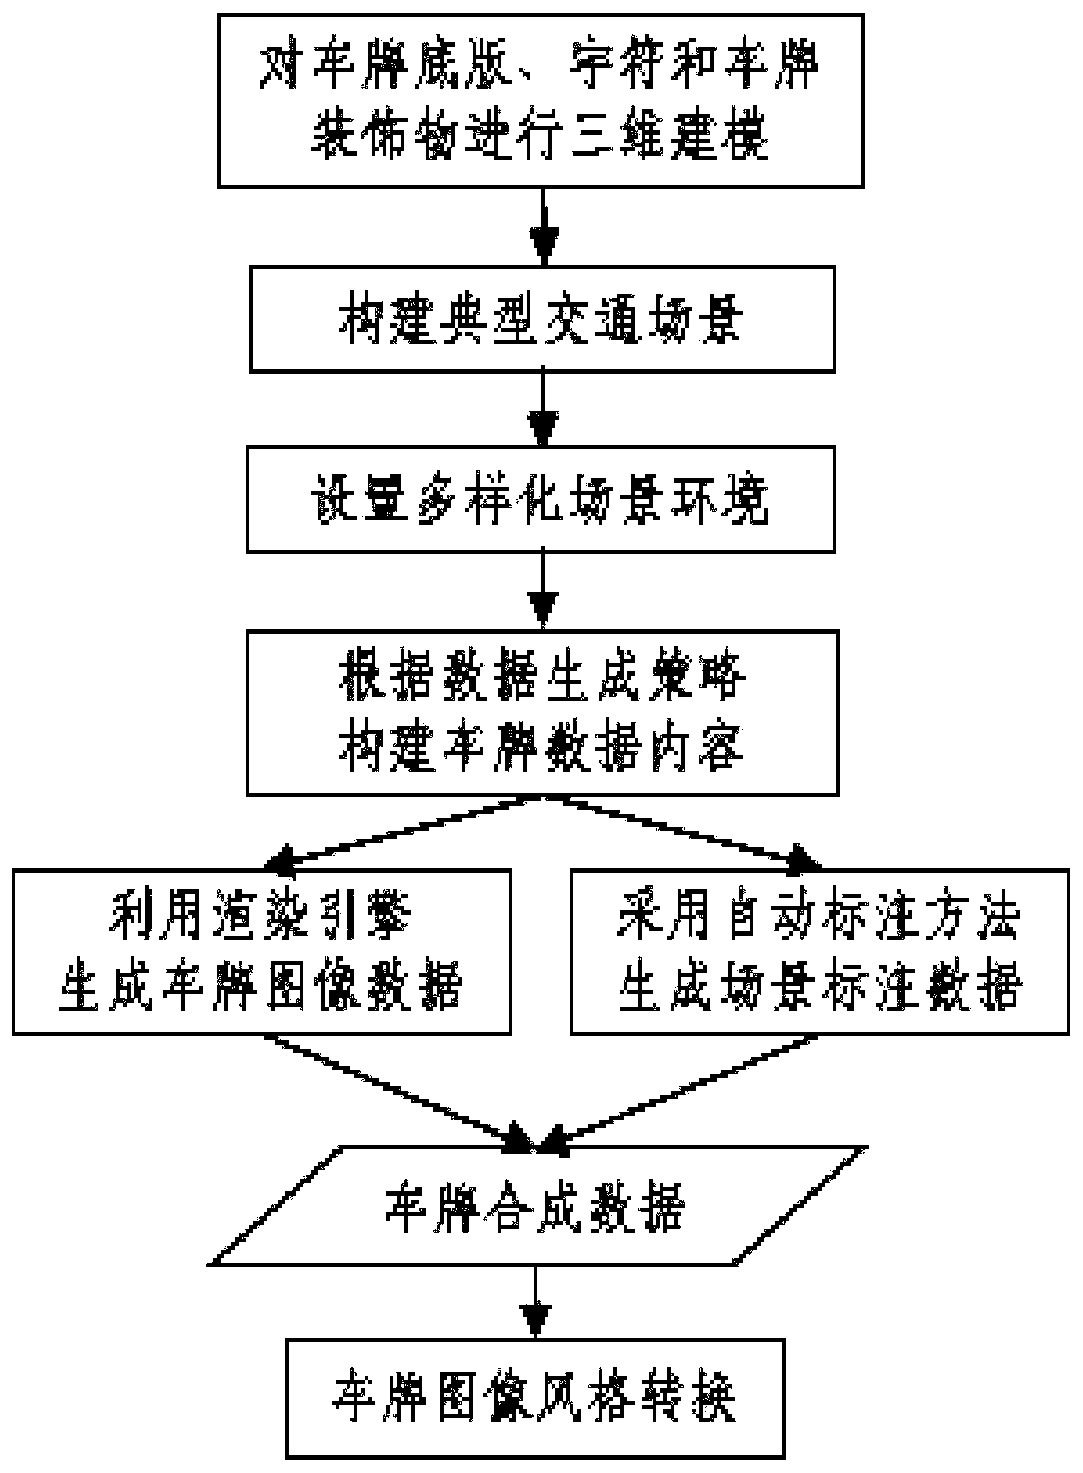 Motor vehicle license plate synthetic data generation method